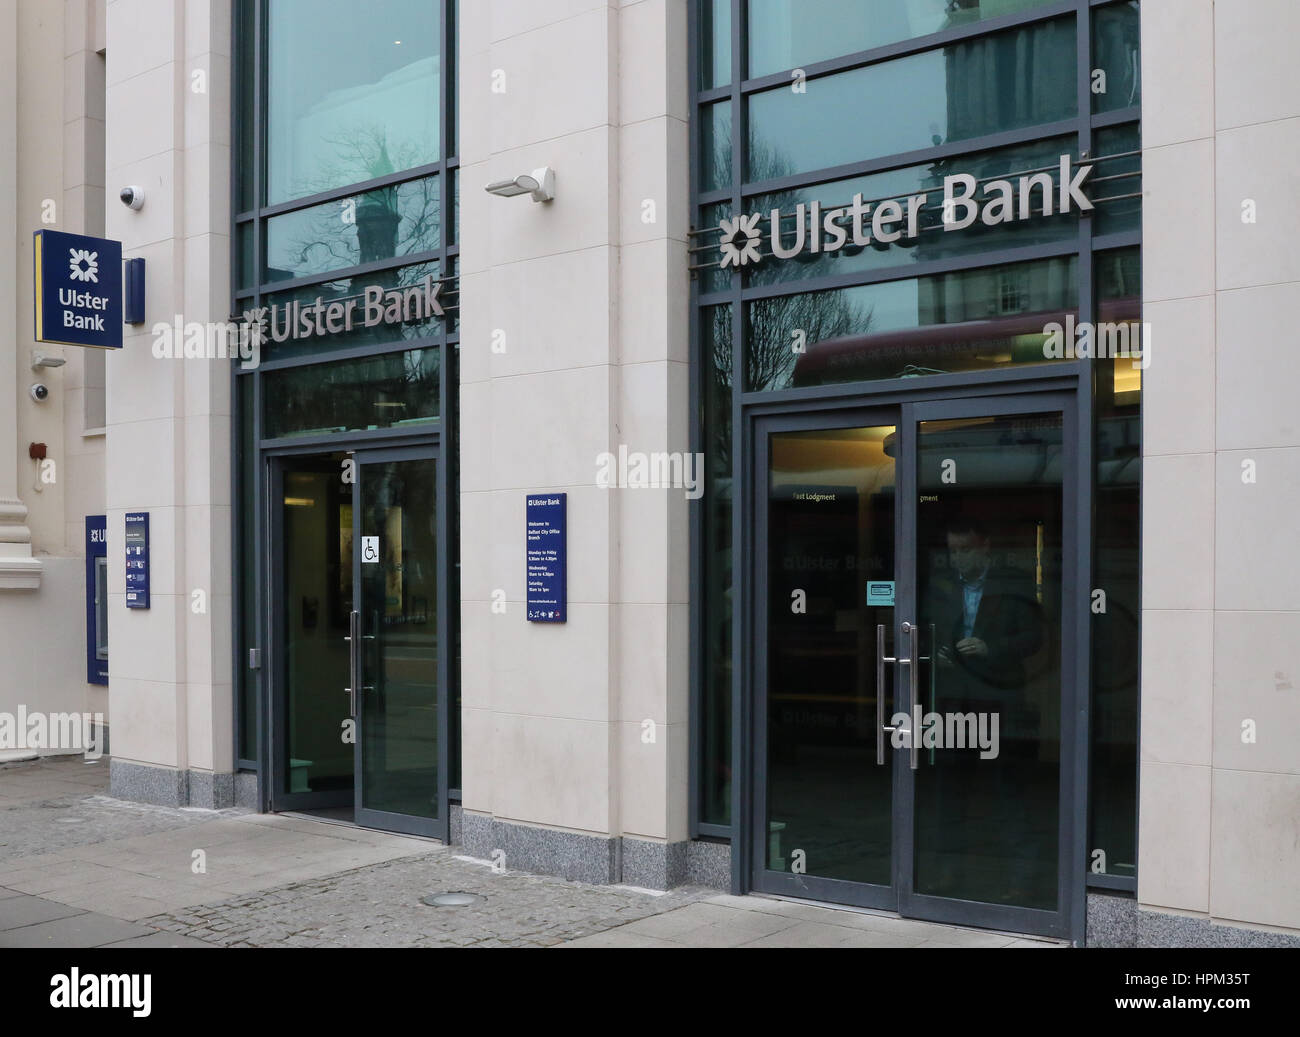 The Belfast City Office Branch of the Ulster Bank in Donegall Square East, Belfast, Northern Ireland. Ulster Bank is a subsidiary of RBS (Royal Bank o Stock Photo